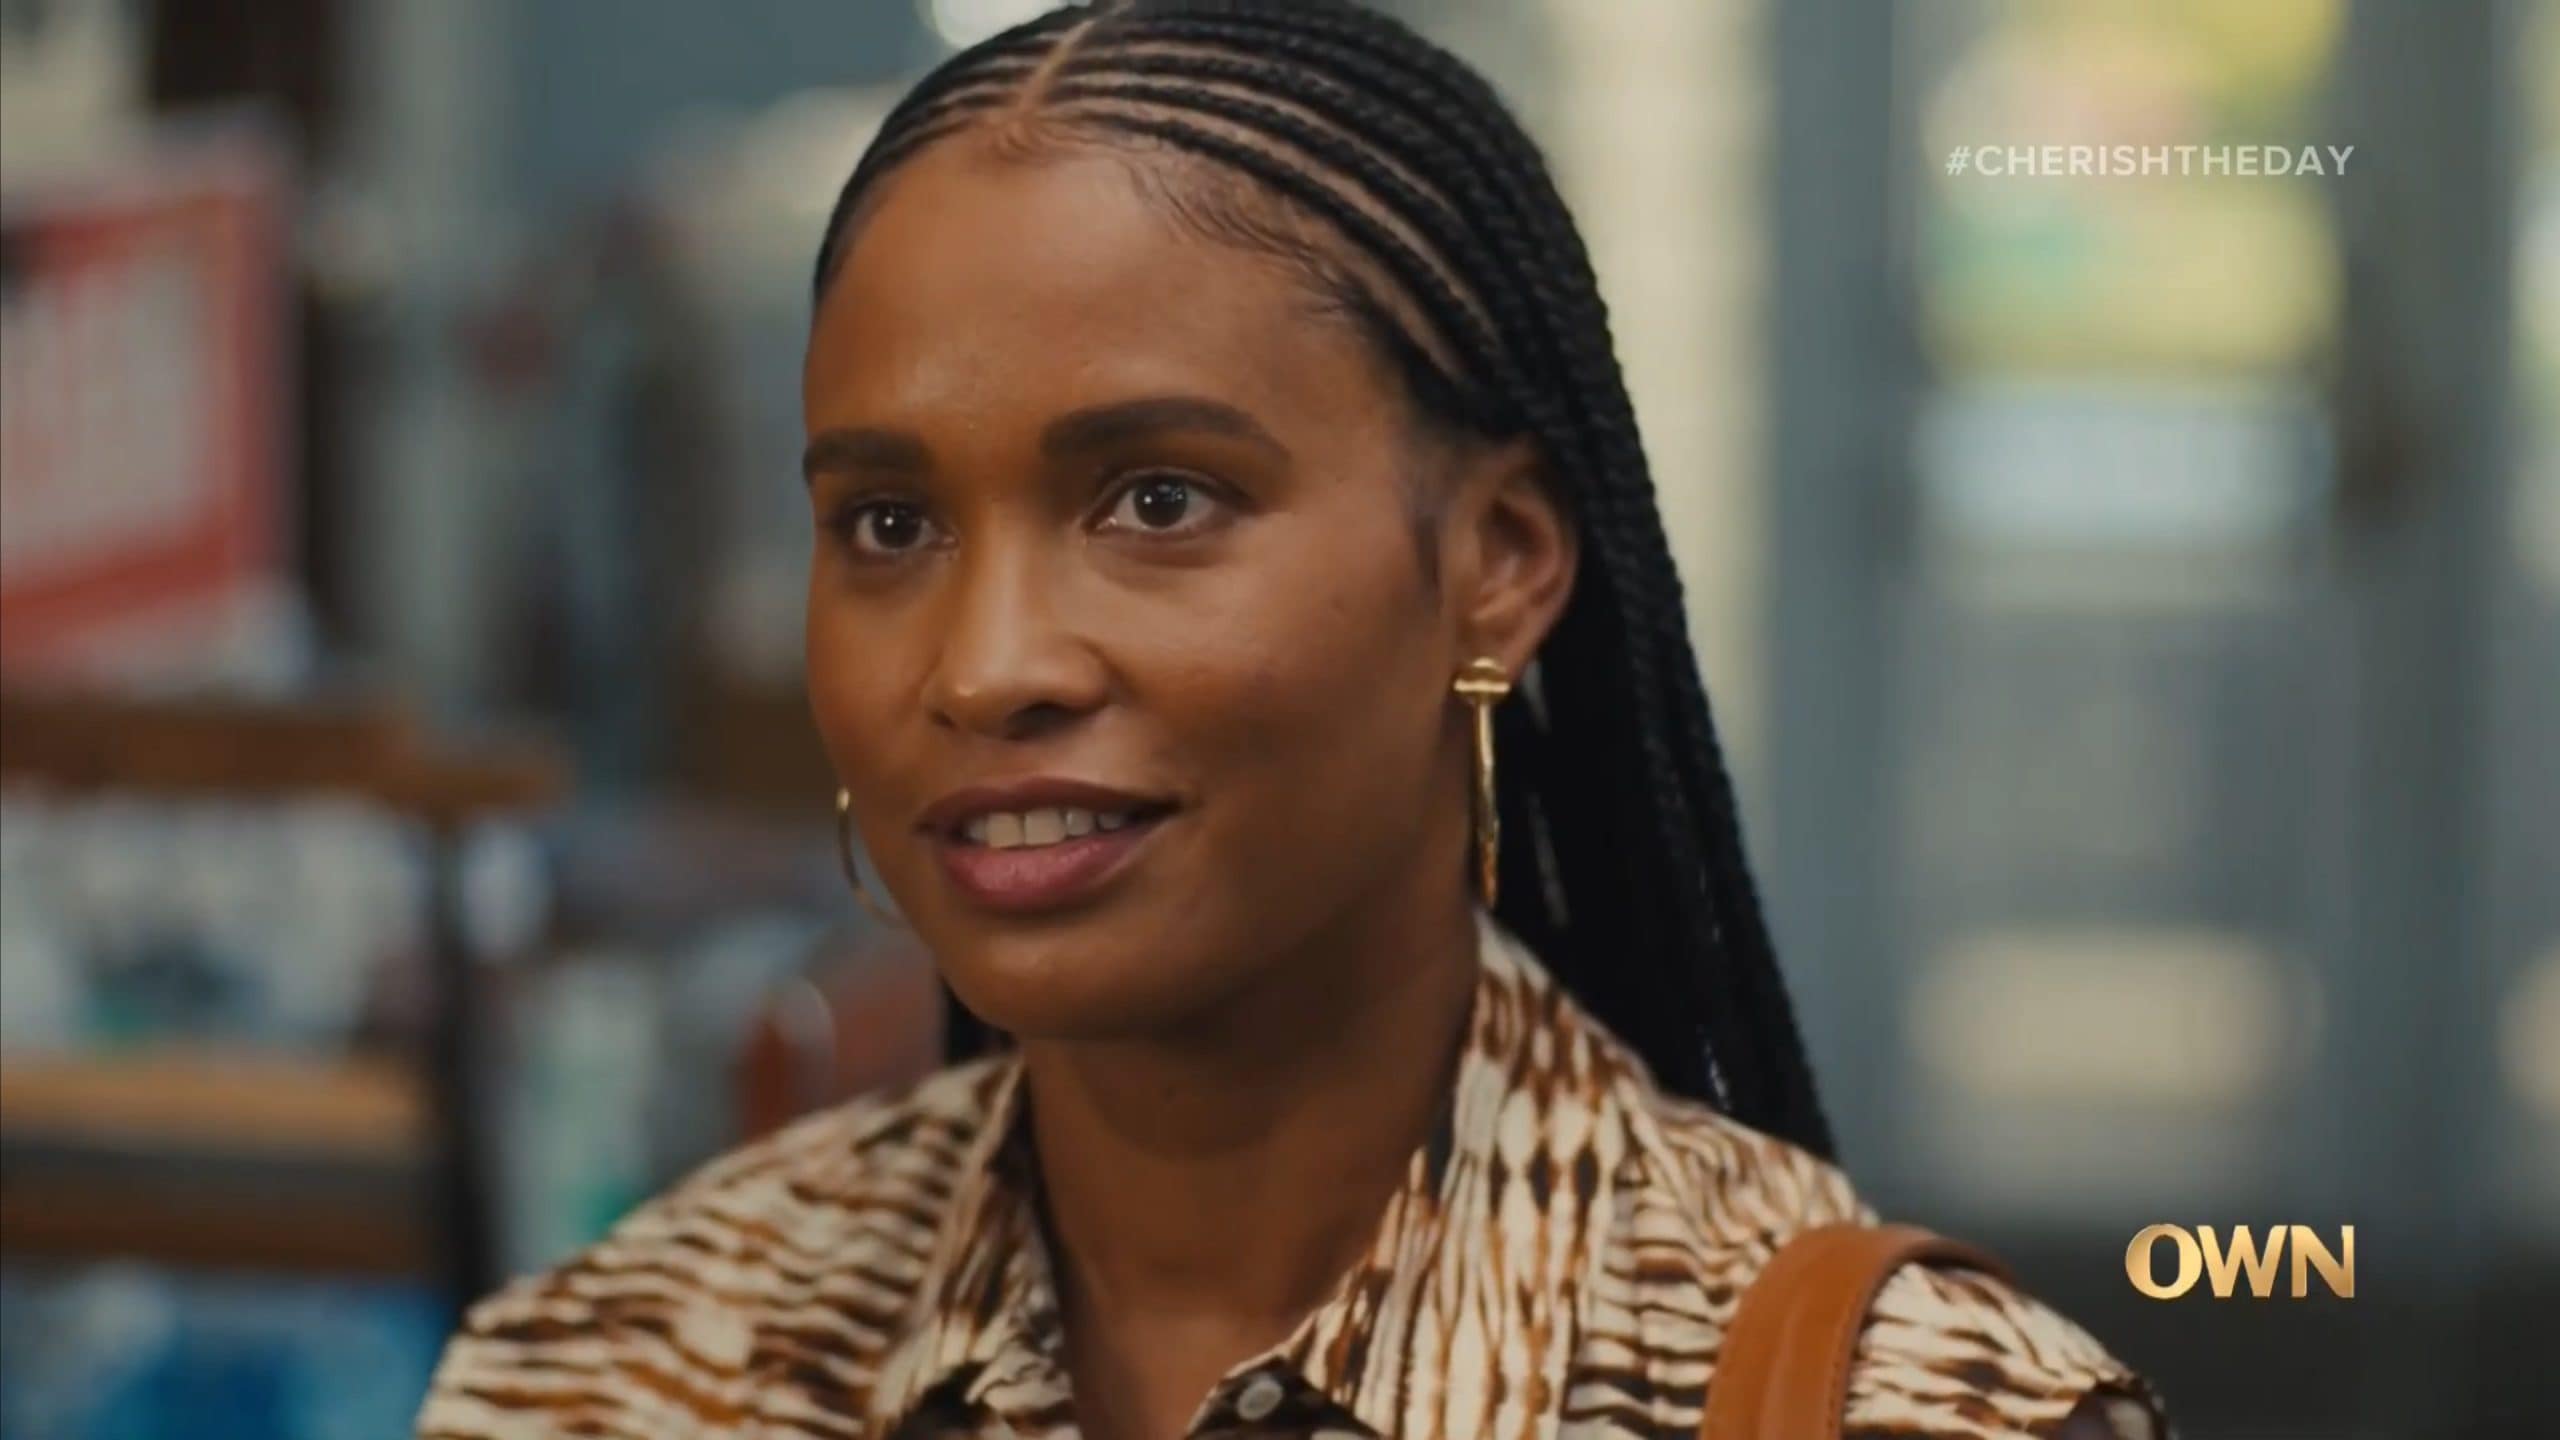 Sunday (Joy Bryant) seeing Ellis for the first time in 25 years